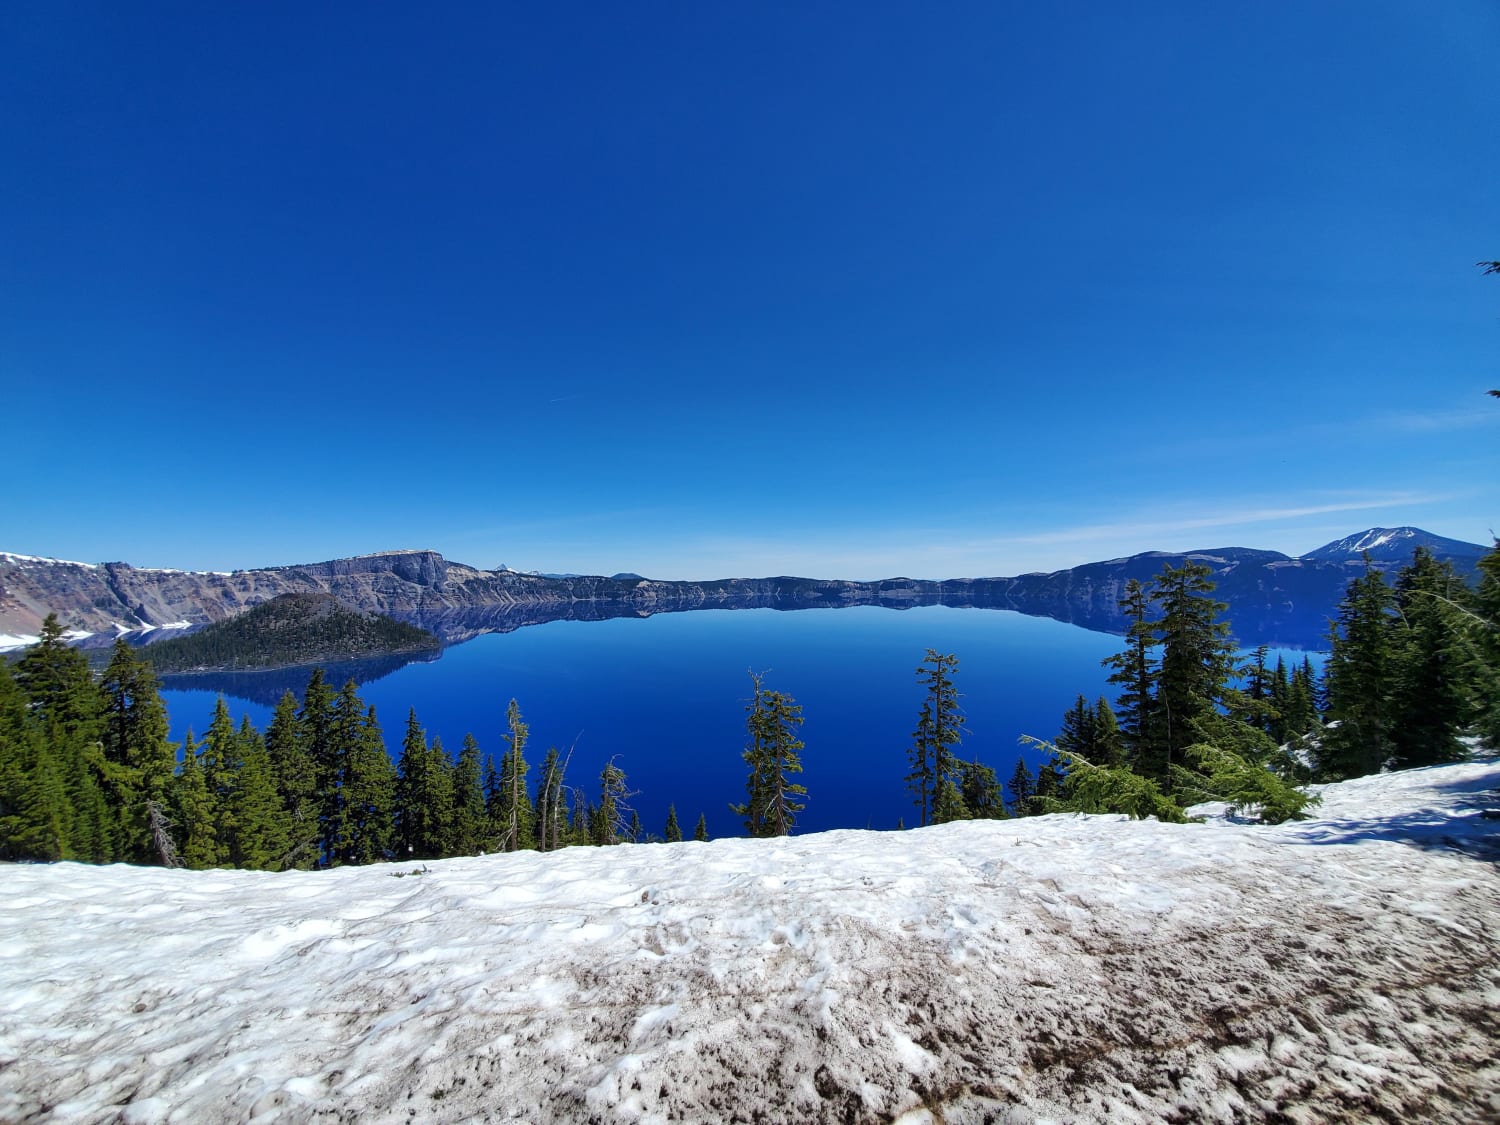 Had the chance to visit Crater Lake in Oregon this past summer. Have never seen water so blue...